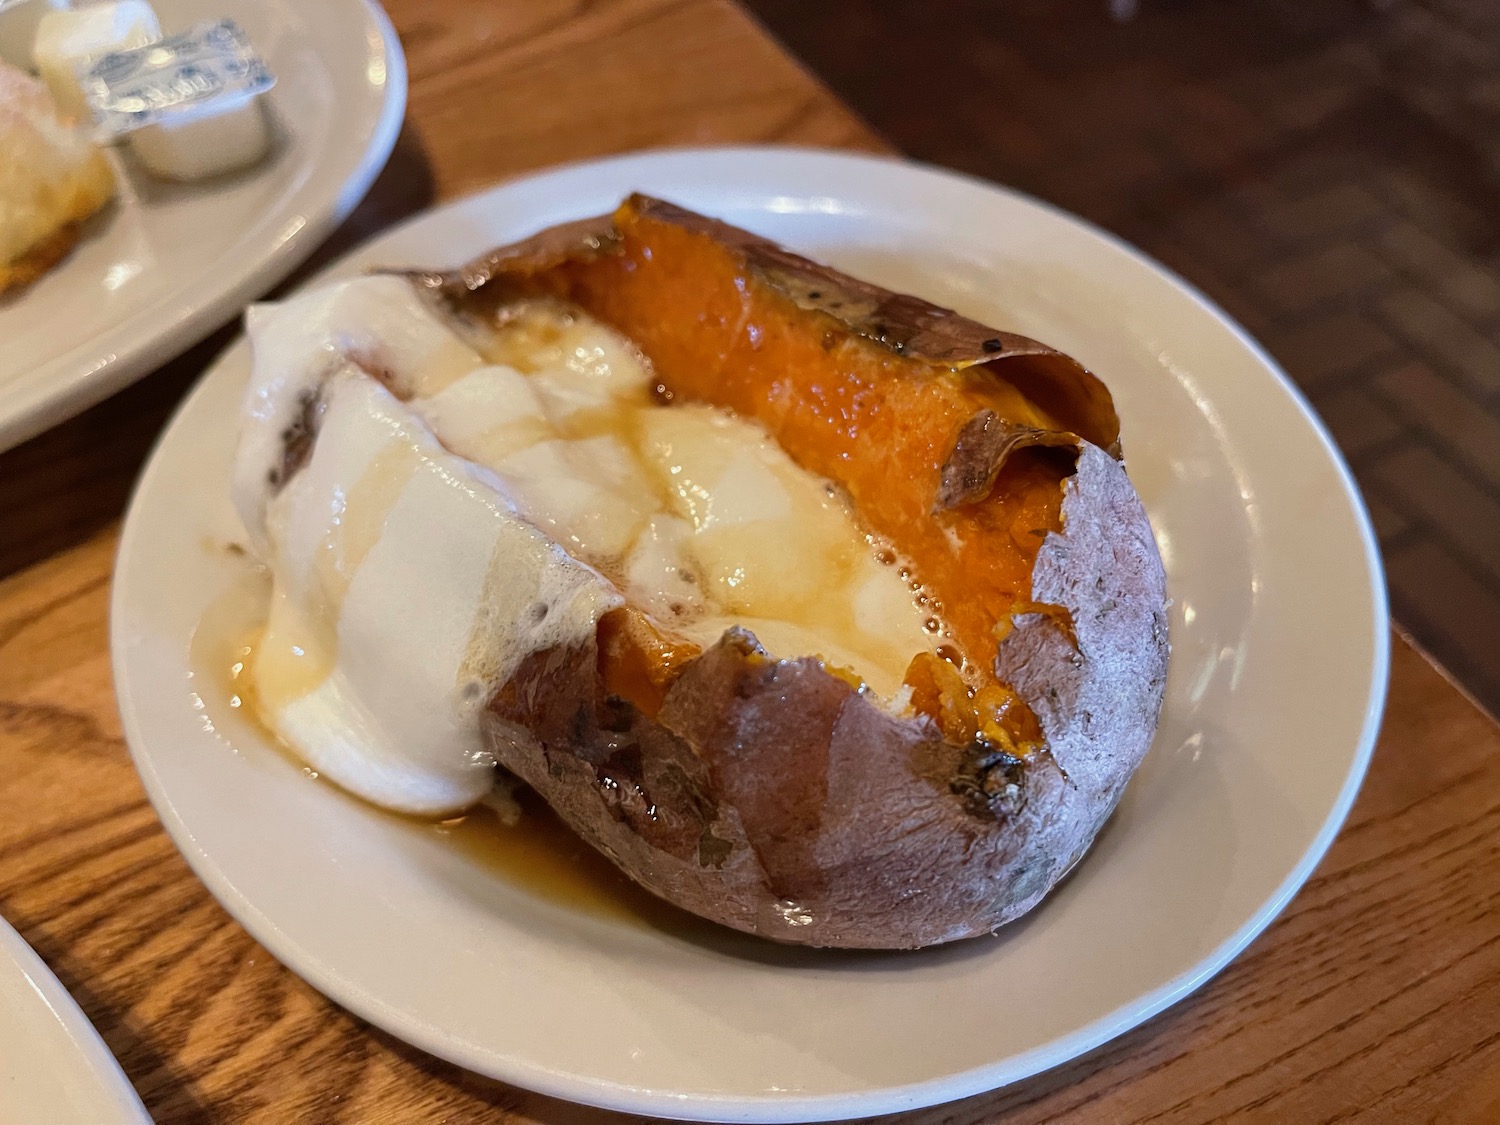 a baked potato with a cream and sauce on a plate